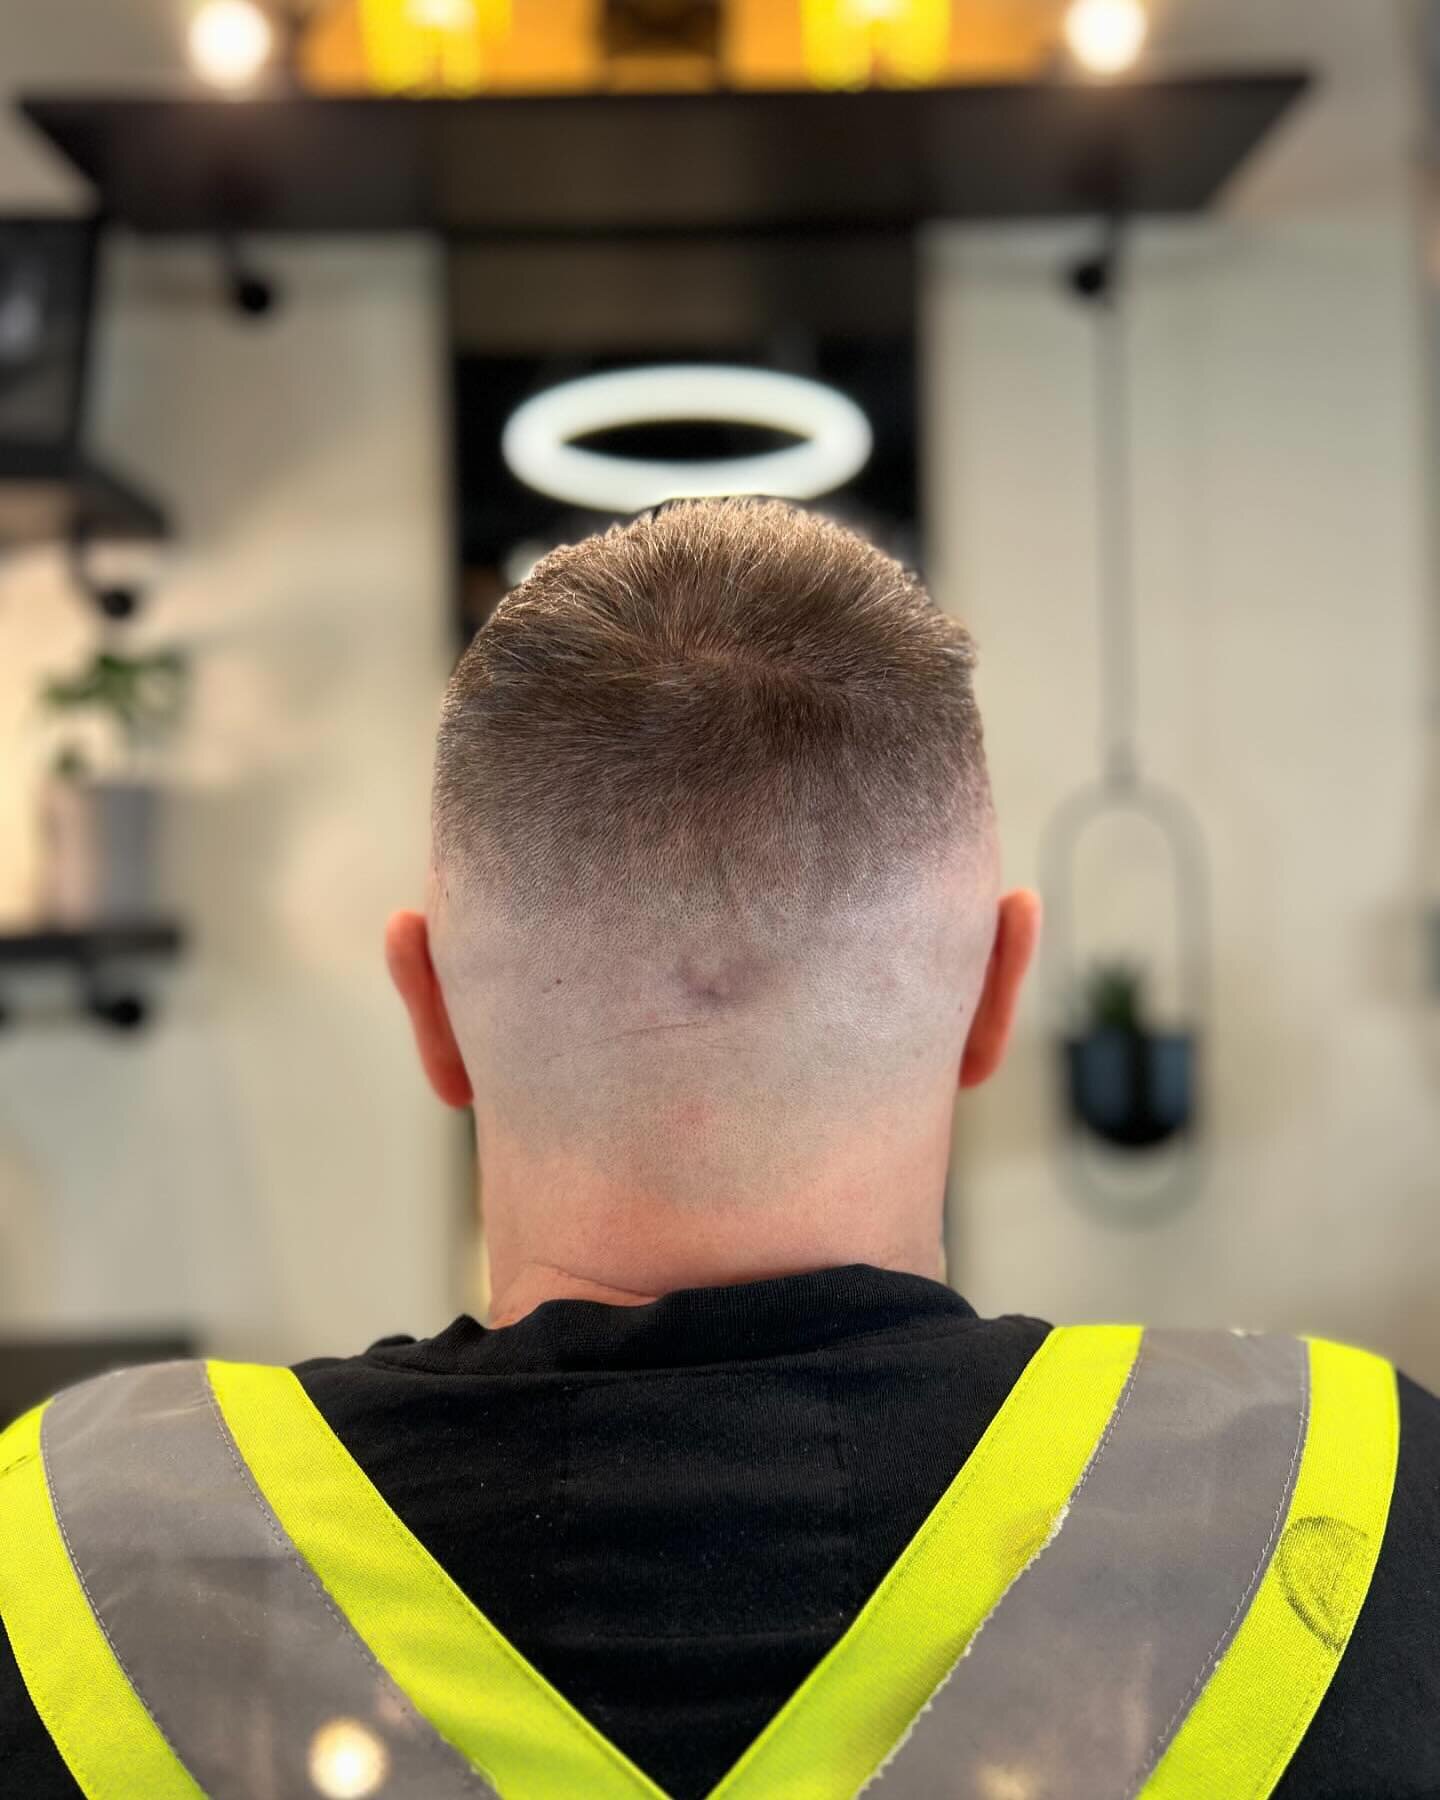 Junior barber cut? If you were wondering what kind of work our junior barber @braydan.dion puts out wonder no more. 

Book a service with @braydan.dion under &ldquo;Junior Barber&rdquo; services for a helluva deal&hellip; take advantage of his discou